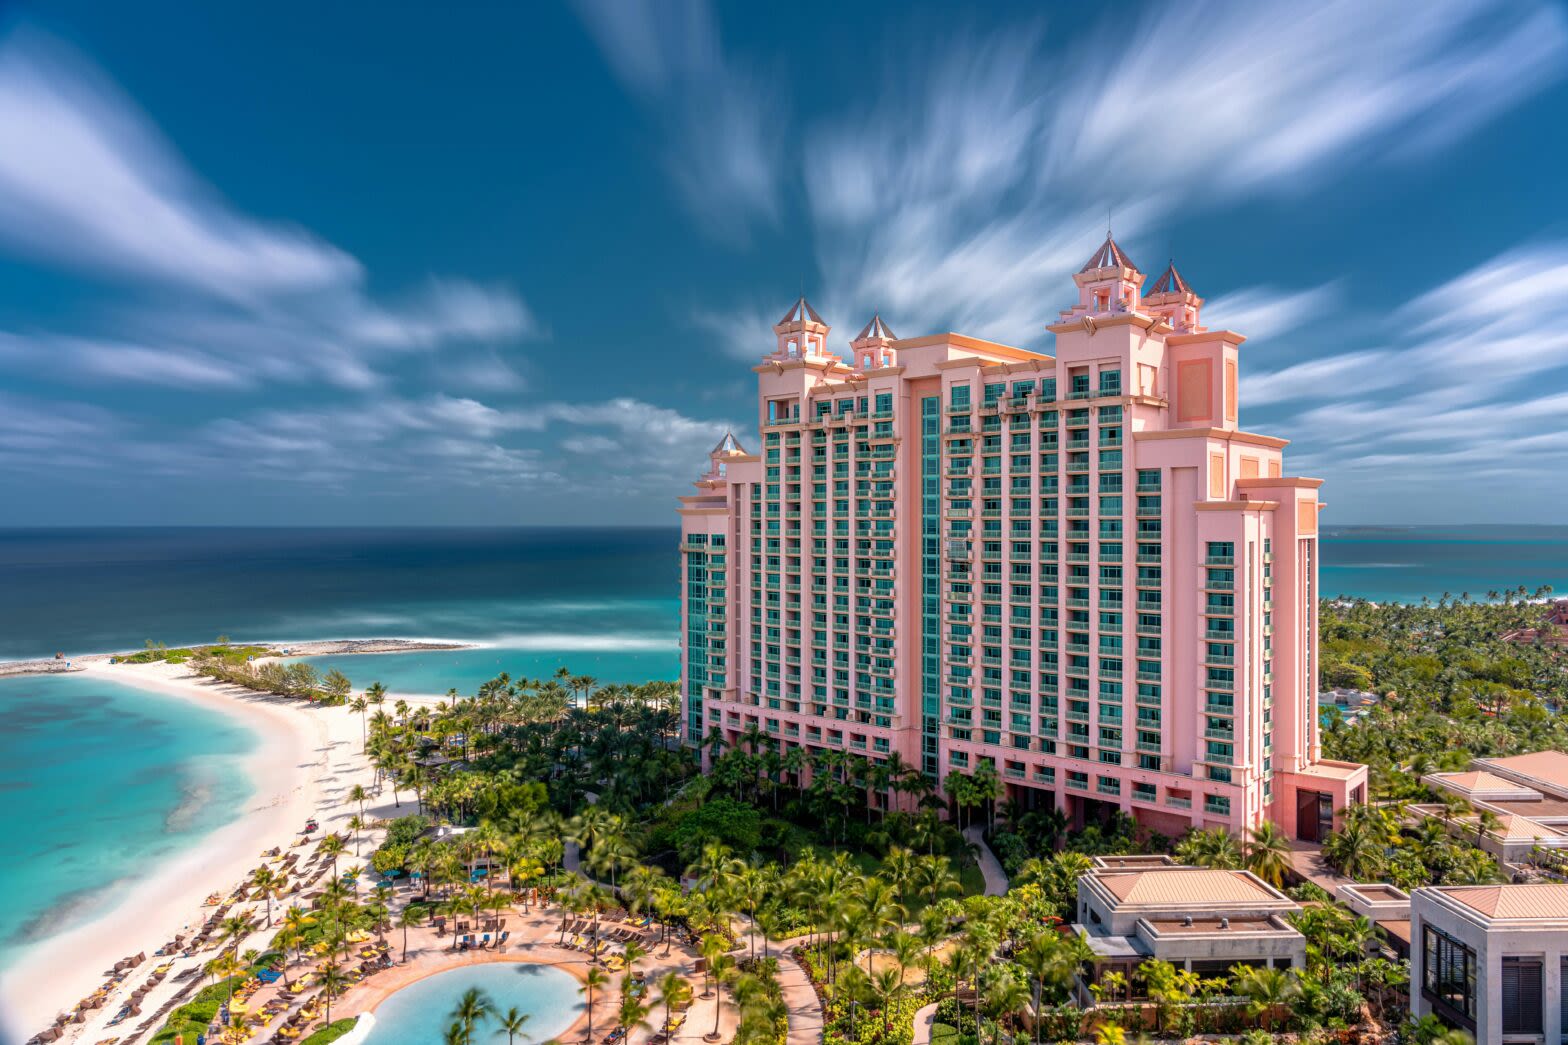 Atlantis And Barbie Team Up For A Picture-Perfect Summer Bahamas Vacation